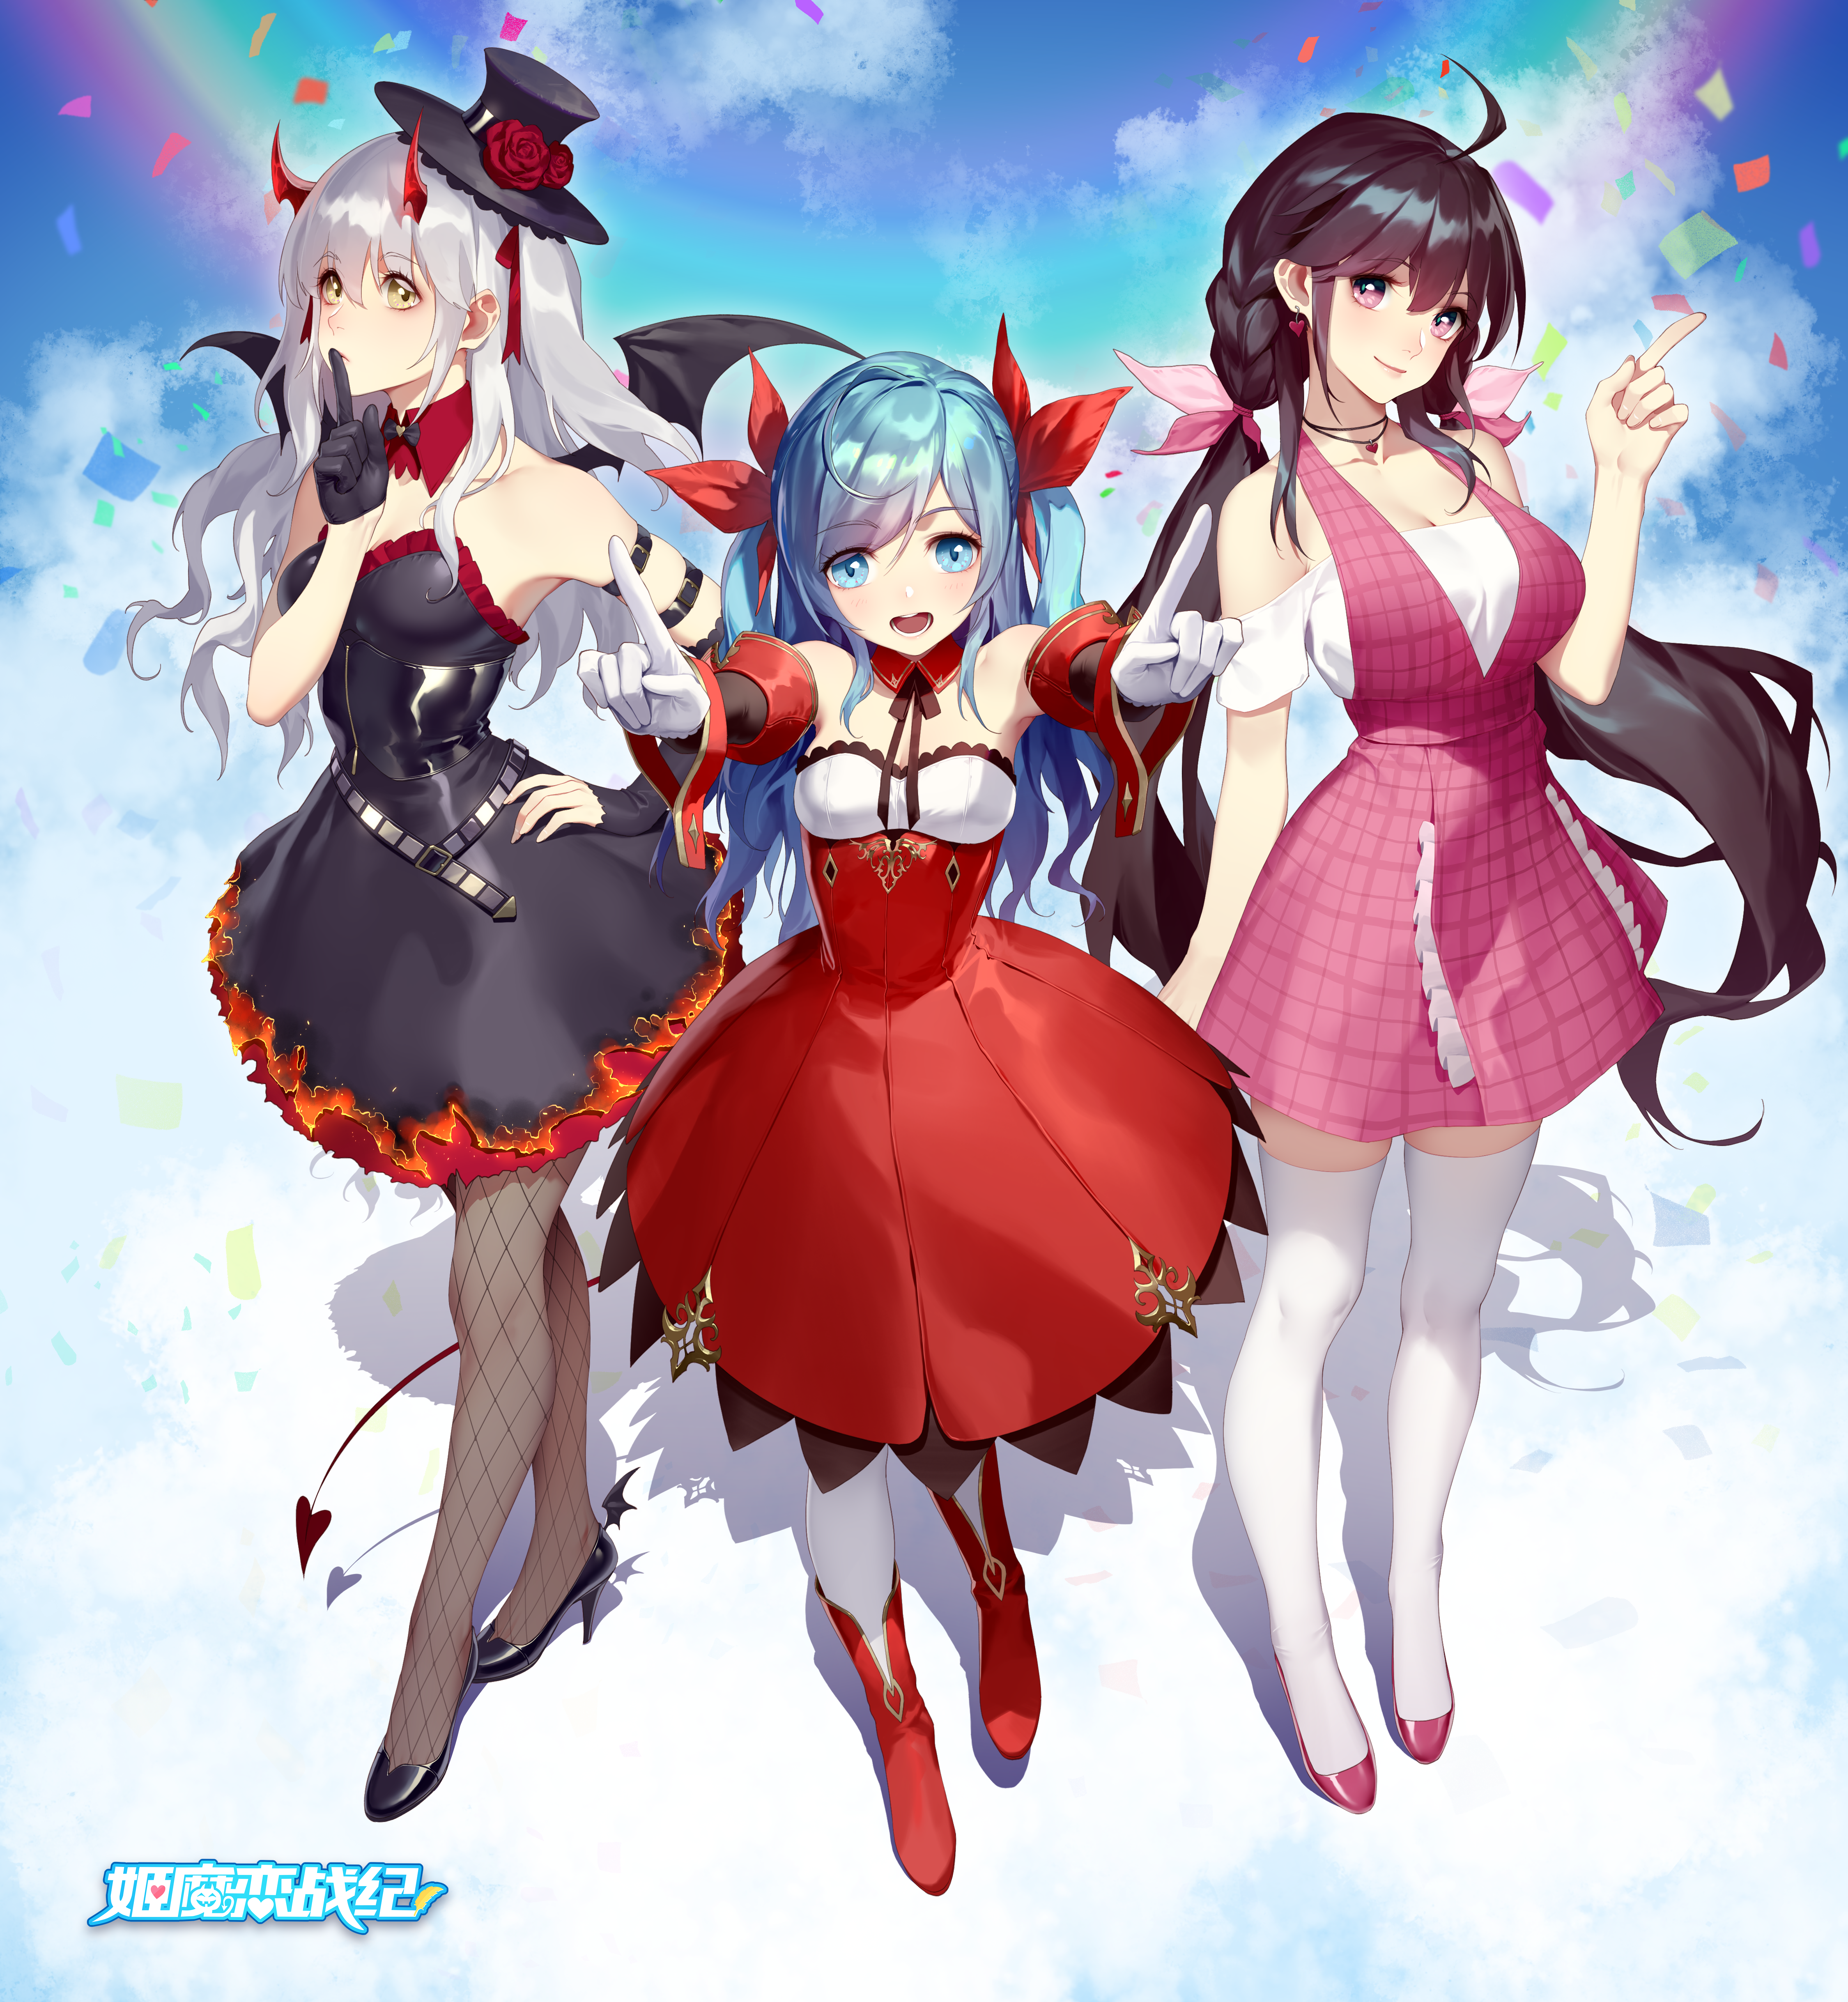 Anime Girls Original Characters Women White Hair Blue Hair Pigtails Brunette Braided Hair Twintails  4500x4875